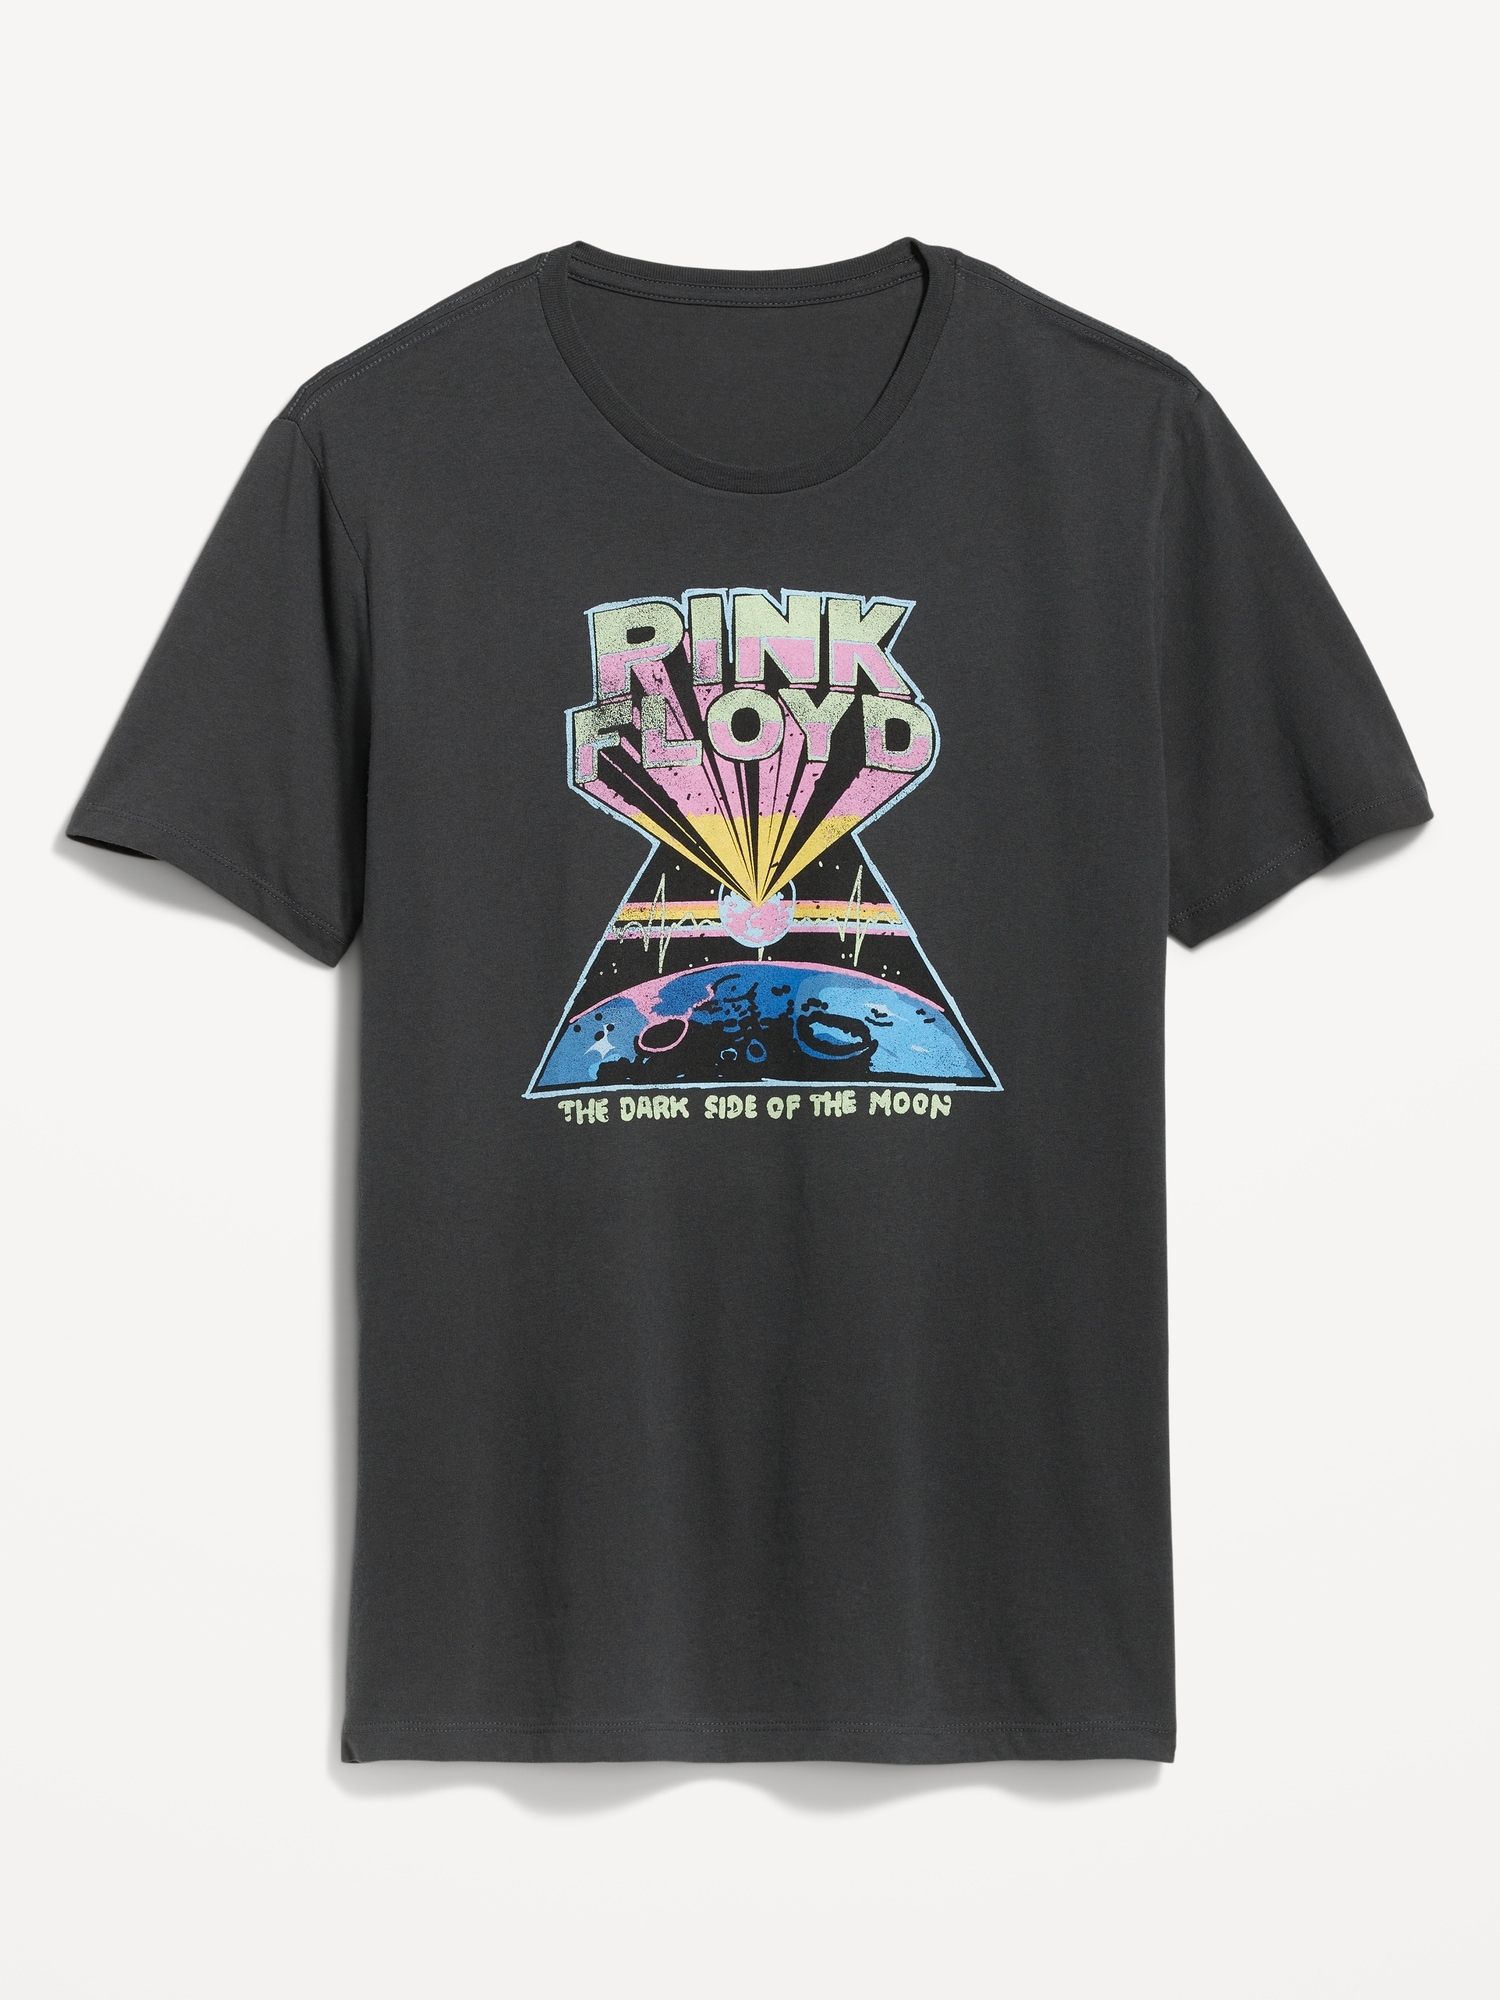 Pink Floyd™ Gender-Neutral T-Shirt for Adults